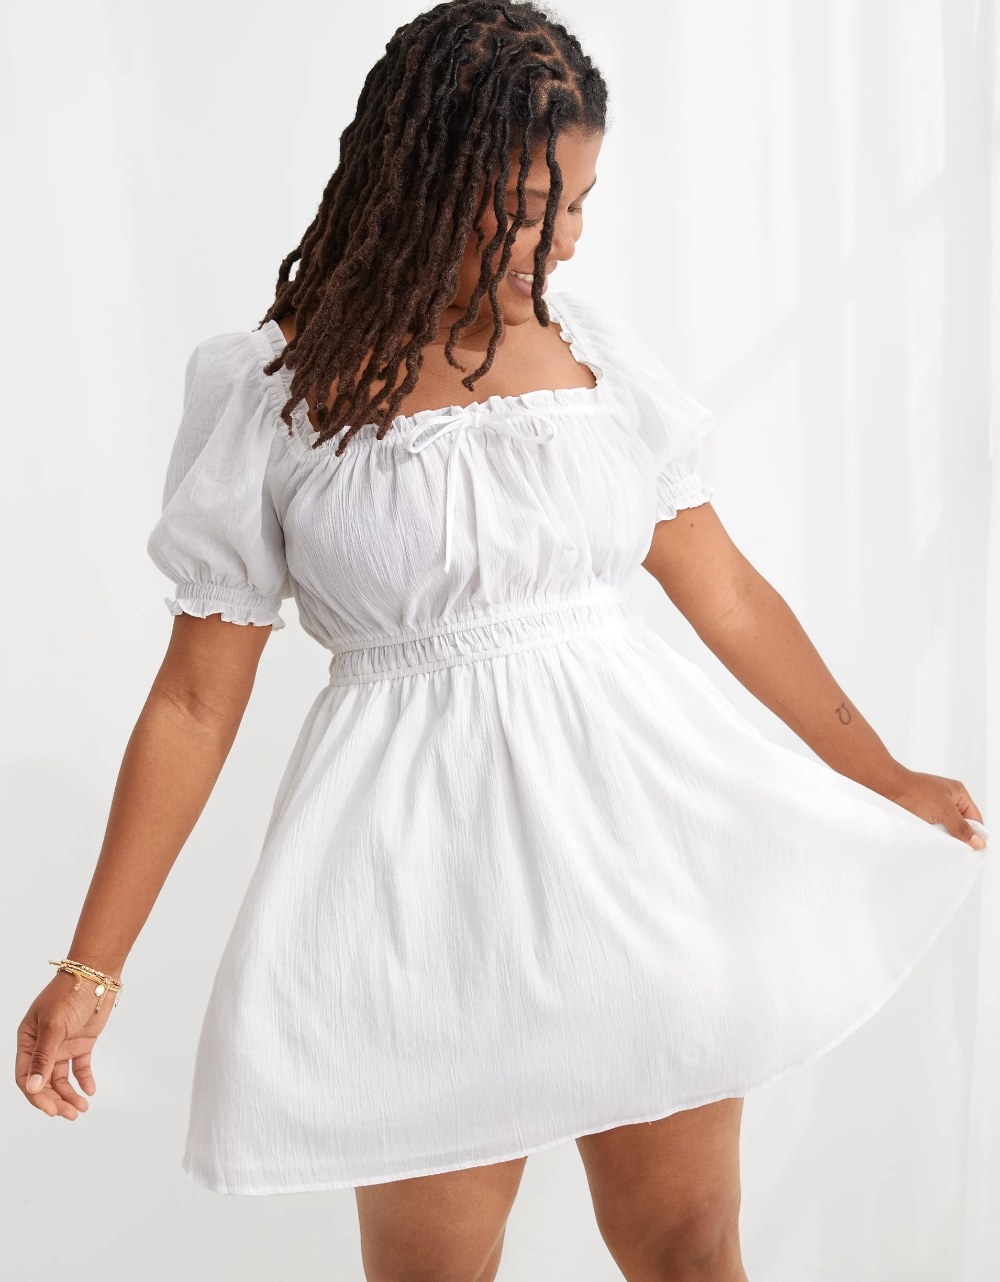 A model wearing the dress in the color White